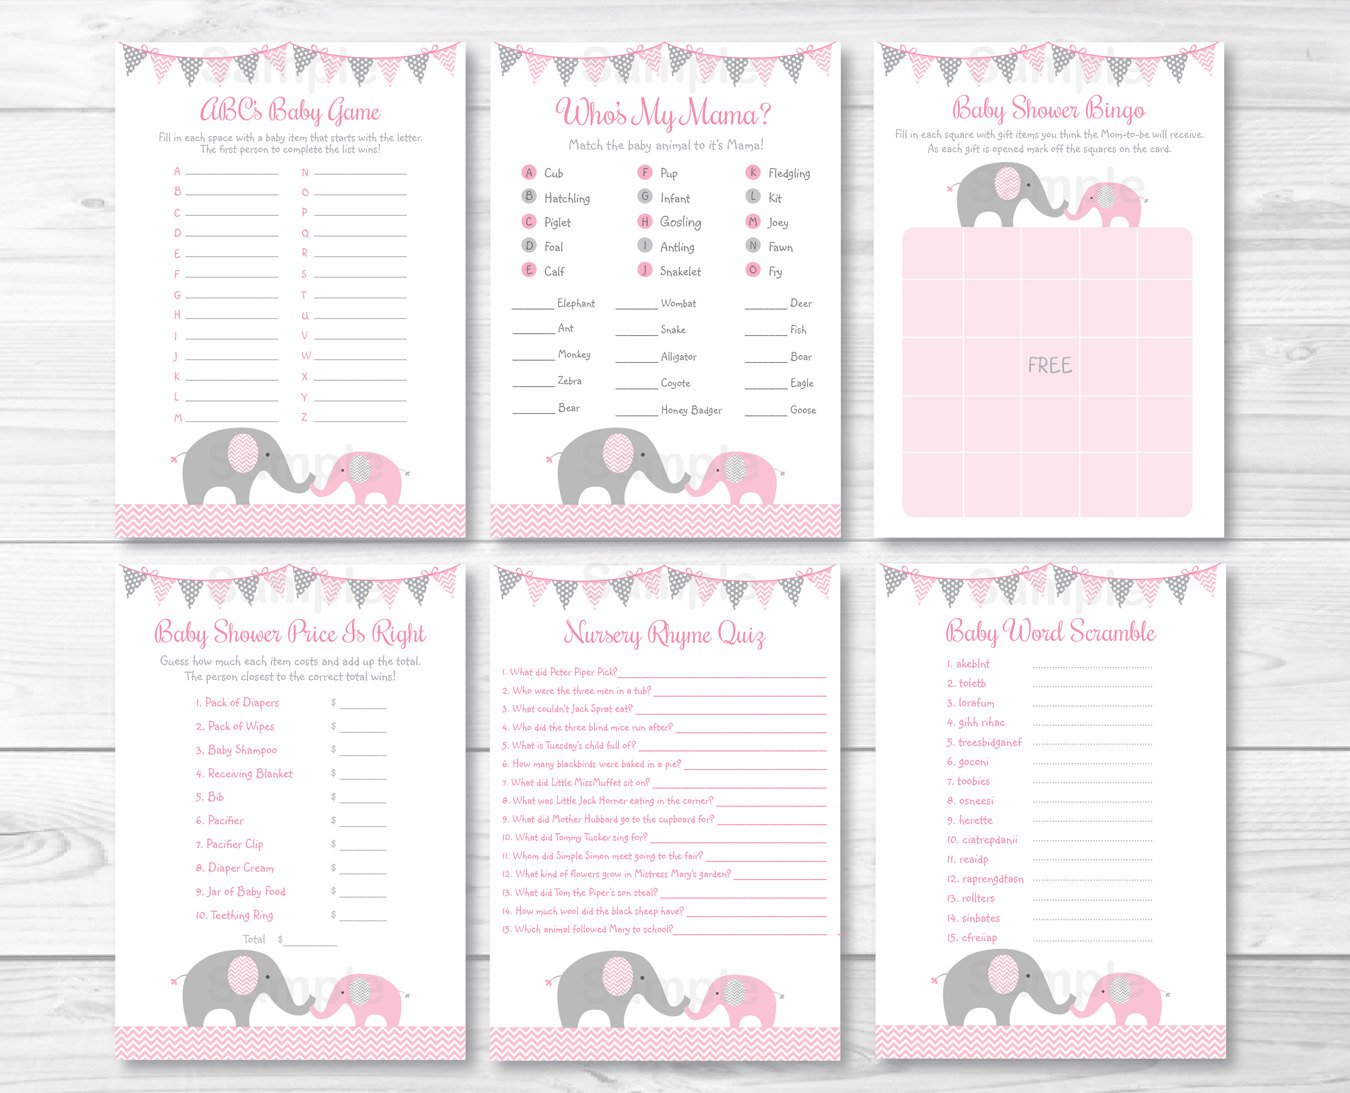 Pink Chevron Elephant Baby Shower Games Pack - 6 Printable Games #A186